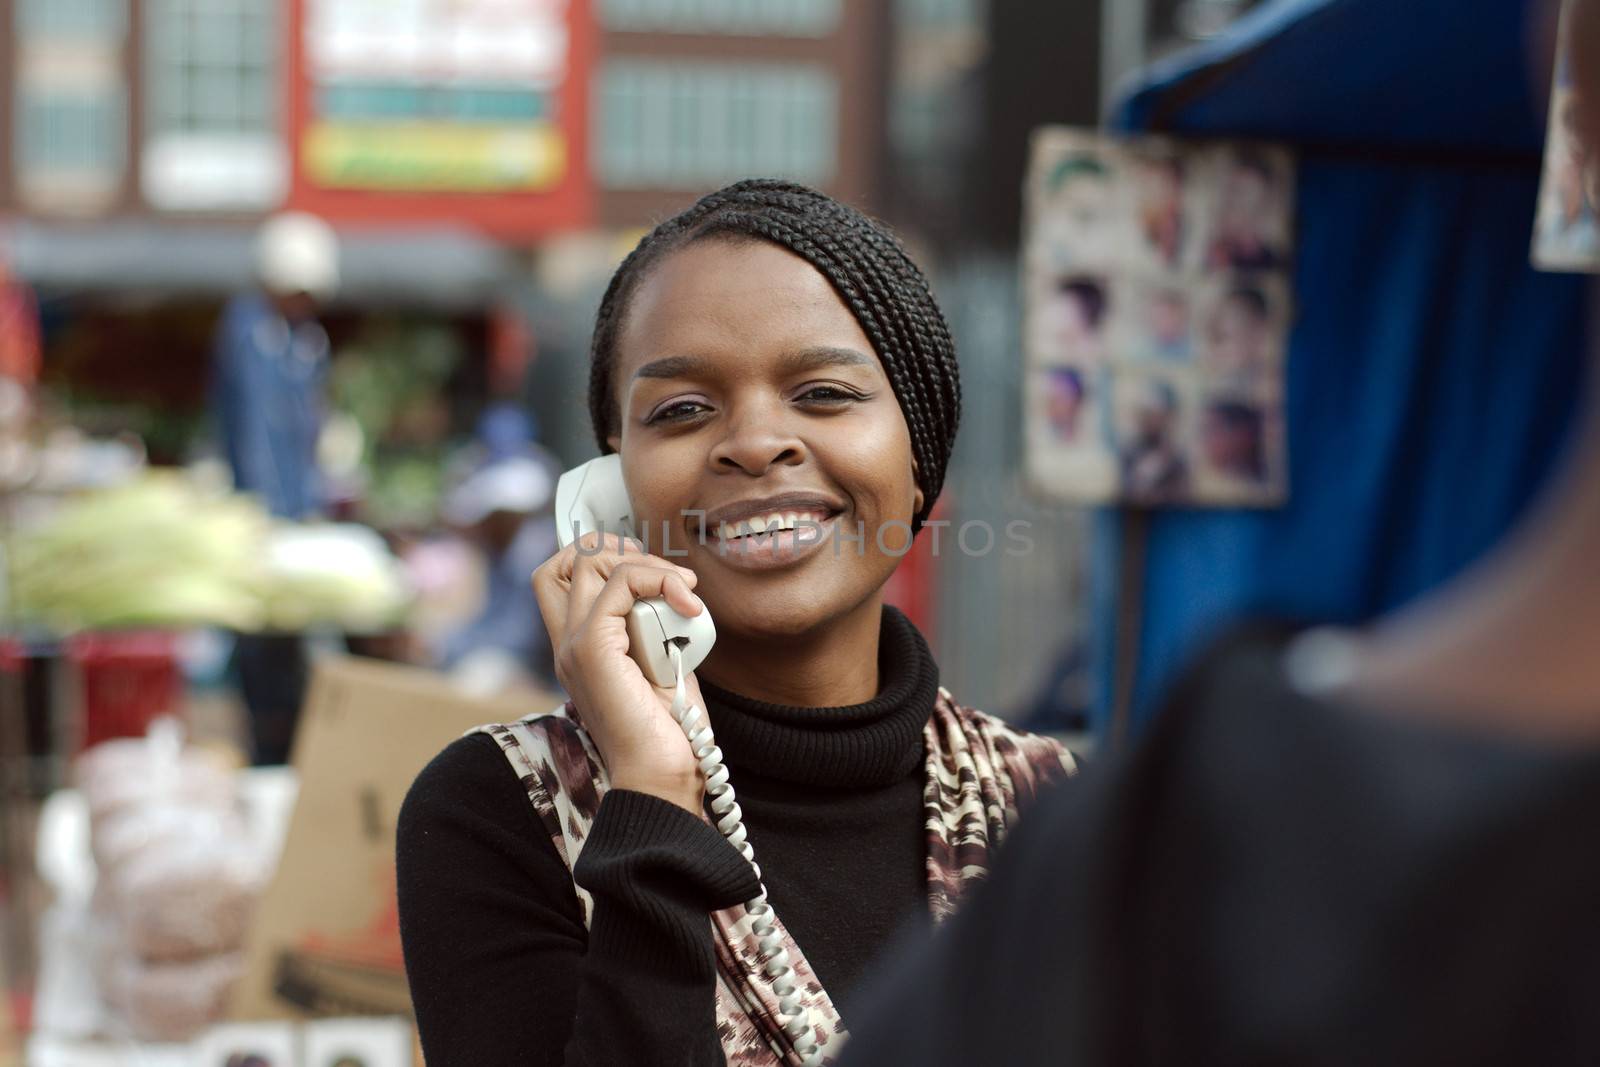 African or black American woman calling on landline telephone in Alexandra township